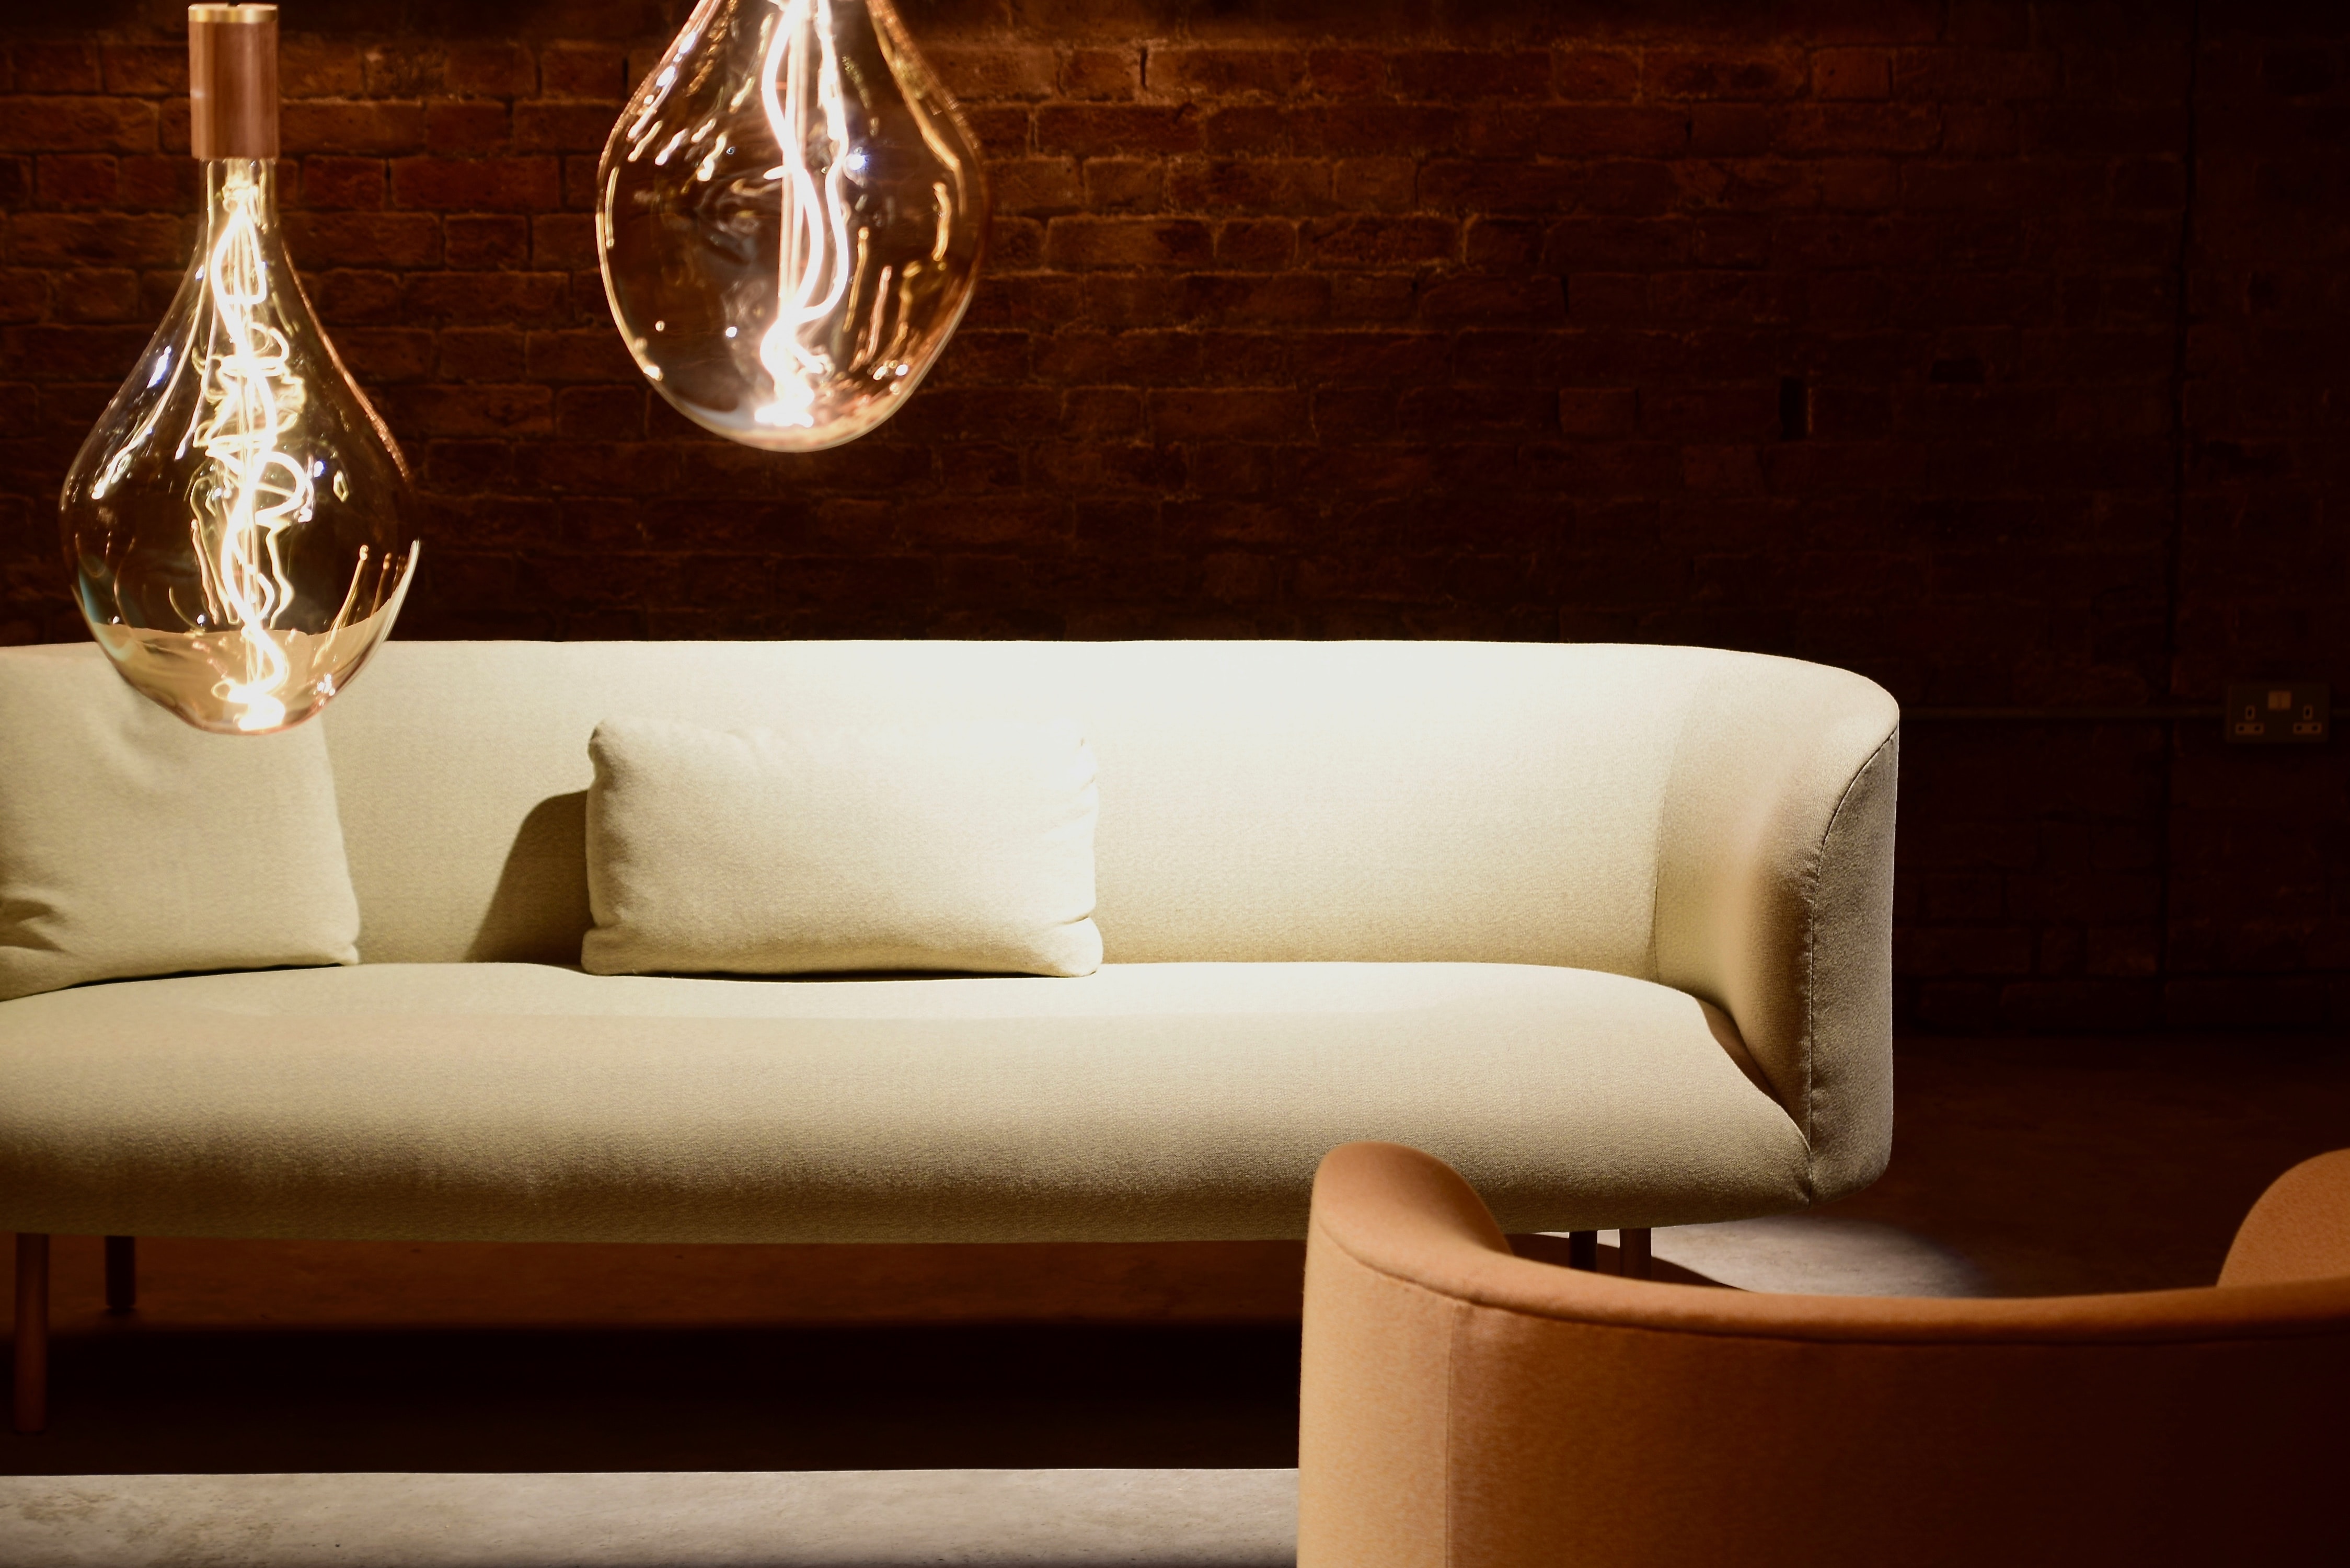 2 light bulbs with sofa in background.